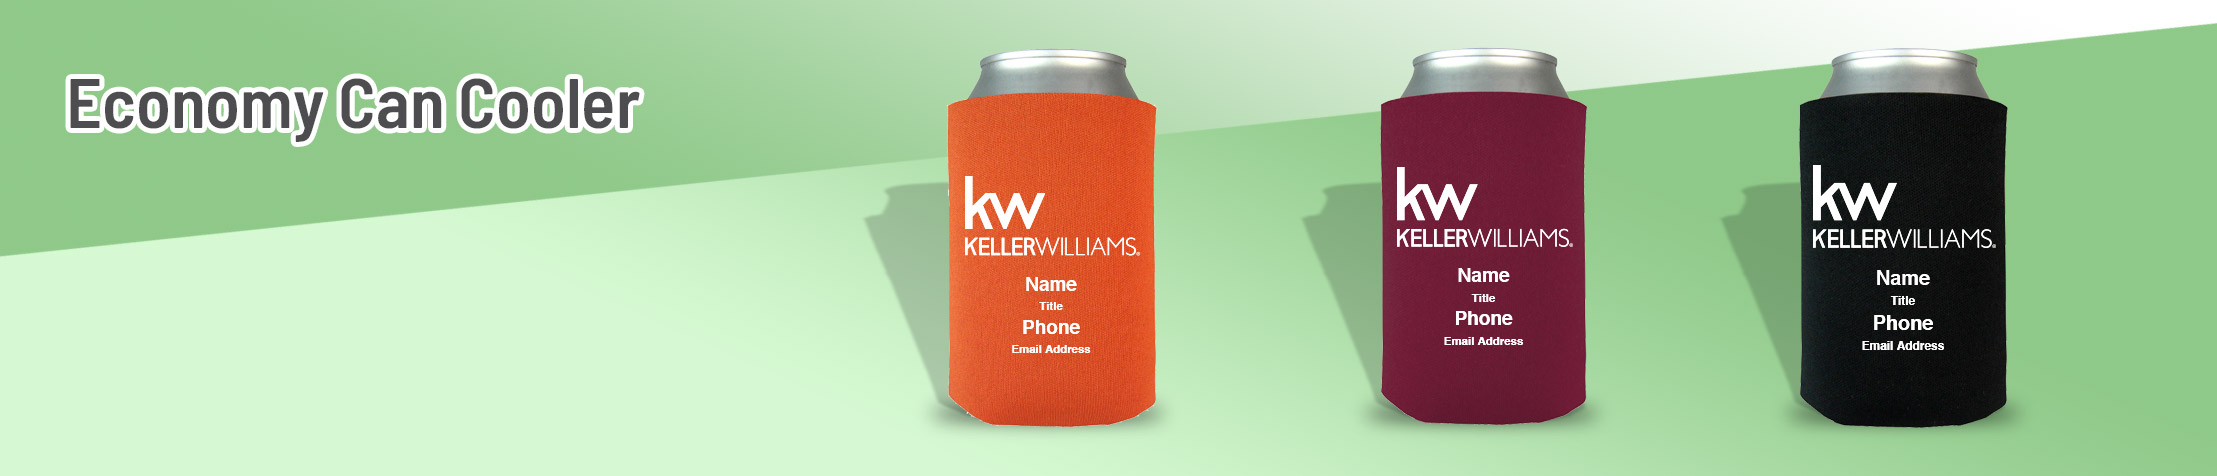 Keller Williams Real Estate Economy Can Cooler - KW personalized realtor promotional products | Sparkprint.com